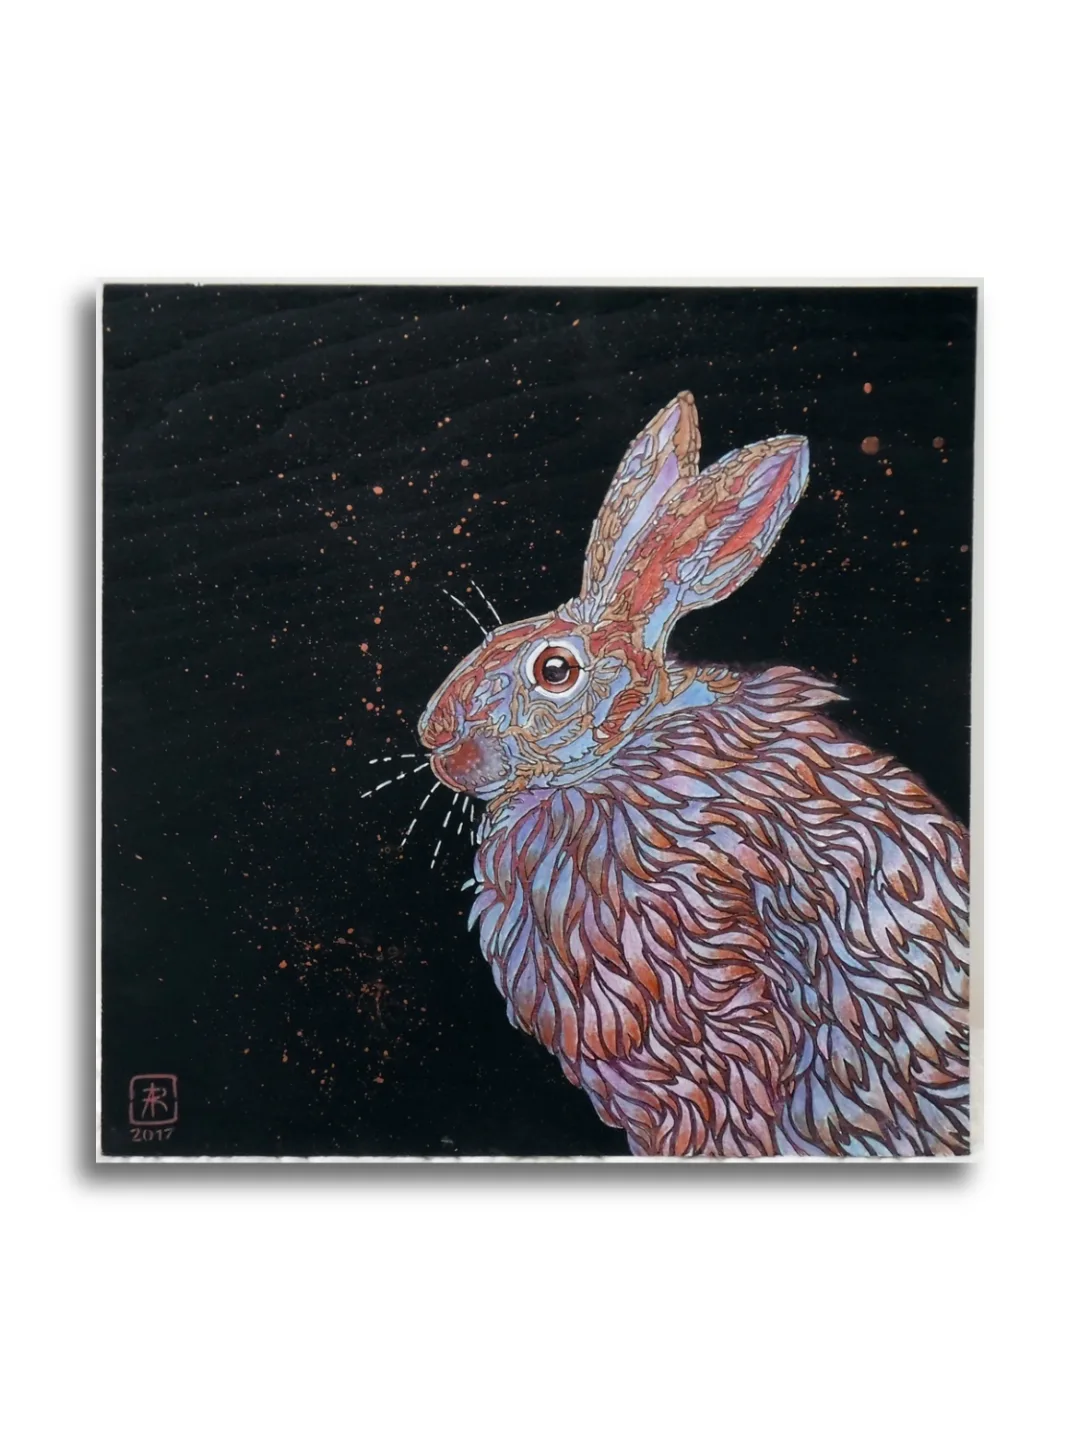 Sitting Hare #1 by Ann Richmond - A stunning, Original stencilled artwork featuring a Hare. Painted in the artist's unique style... Framing available.